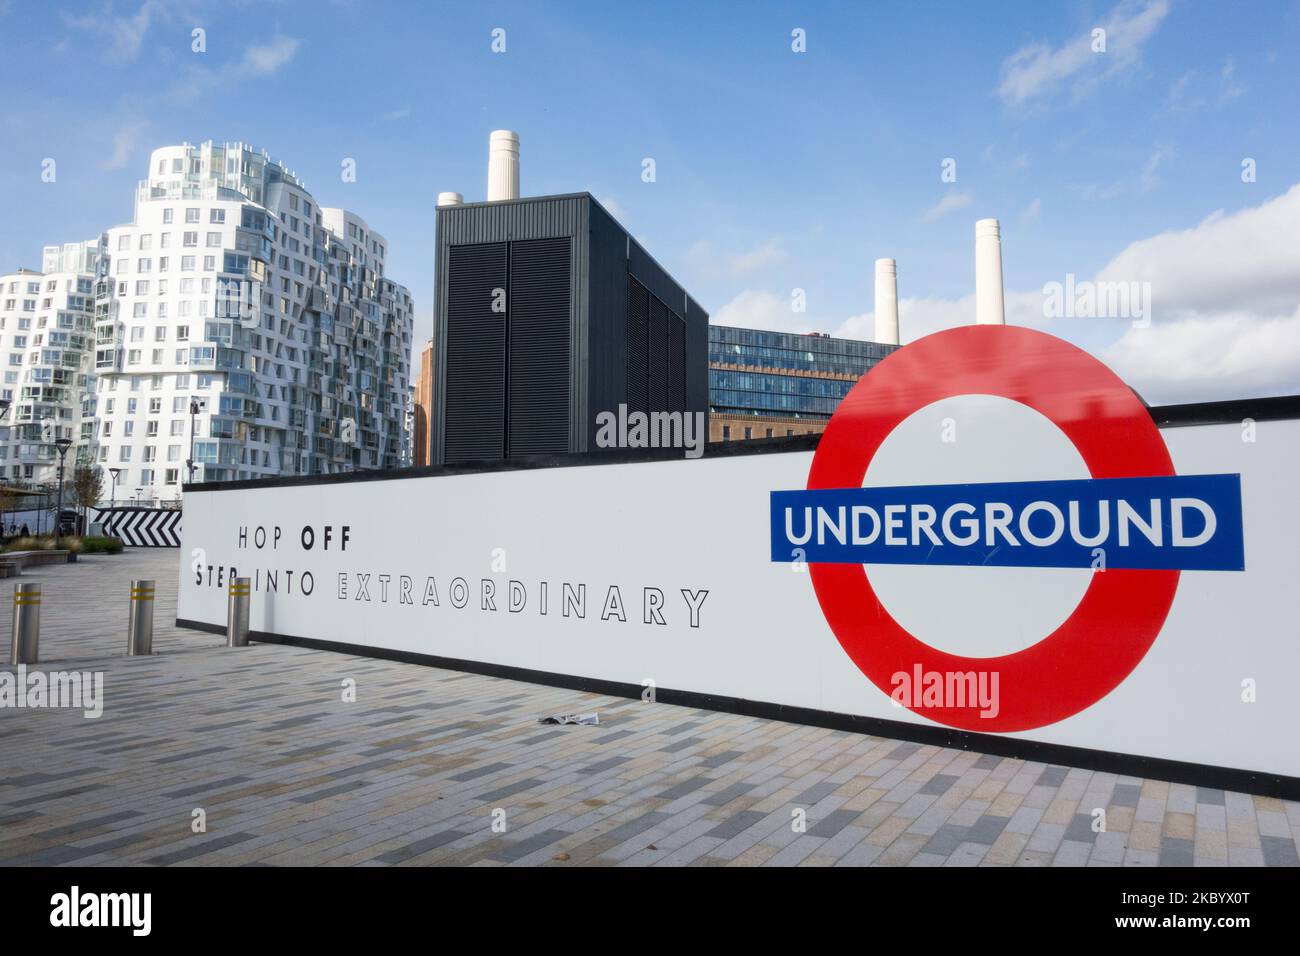 Battersea Power Station and Underground Station, Nine Elms, Vauxhall, Londres, Angleterre, ROYAUME-UNI Banque D'Images